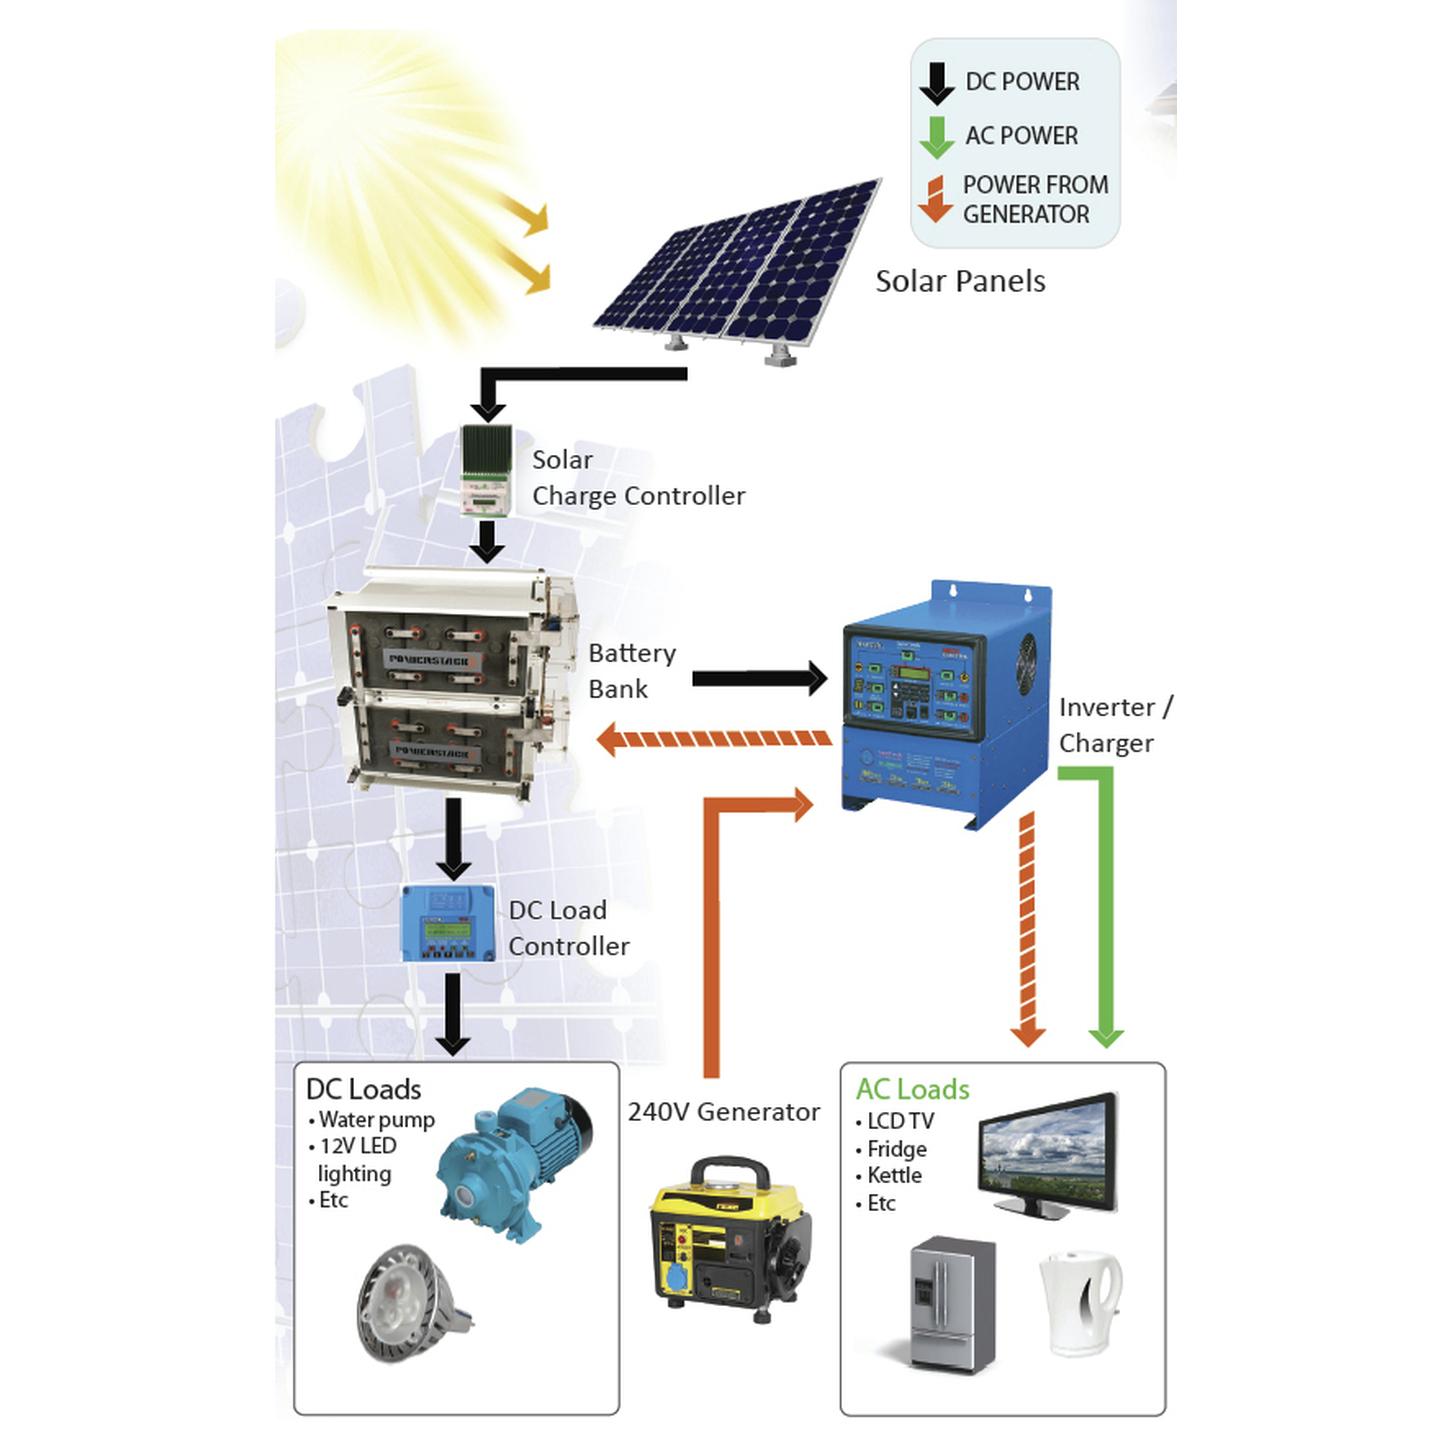 Remote Power Packages - 1.5kWh/day System with 1kW Solar